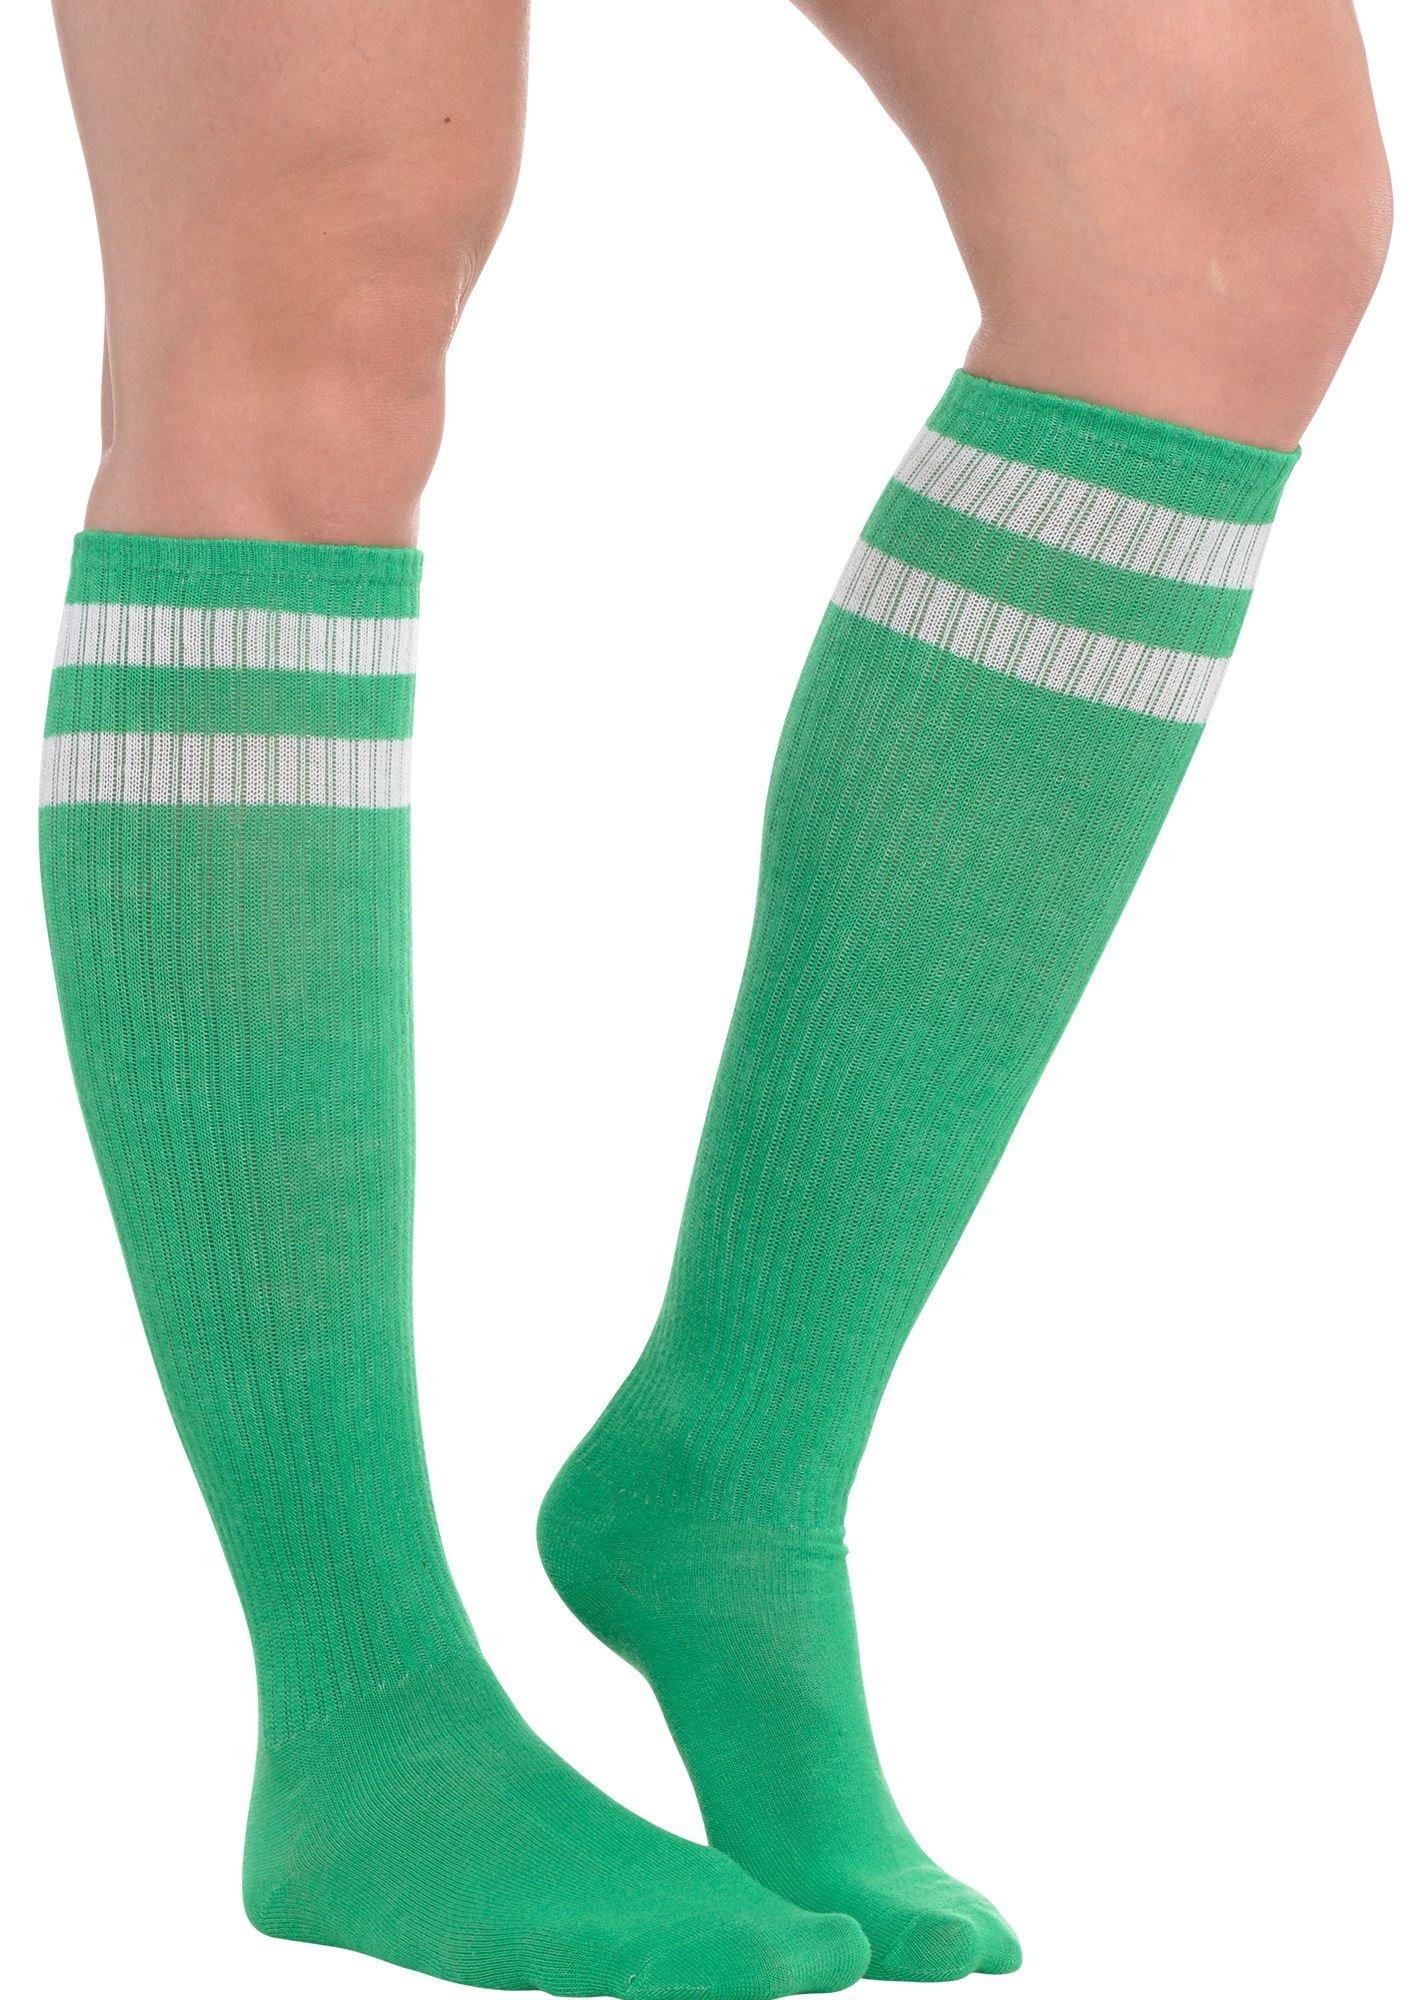 Standard Knee High Socks with White Stripes Sports Costume Party